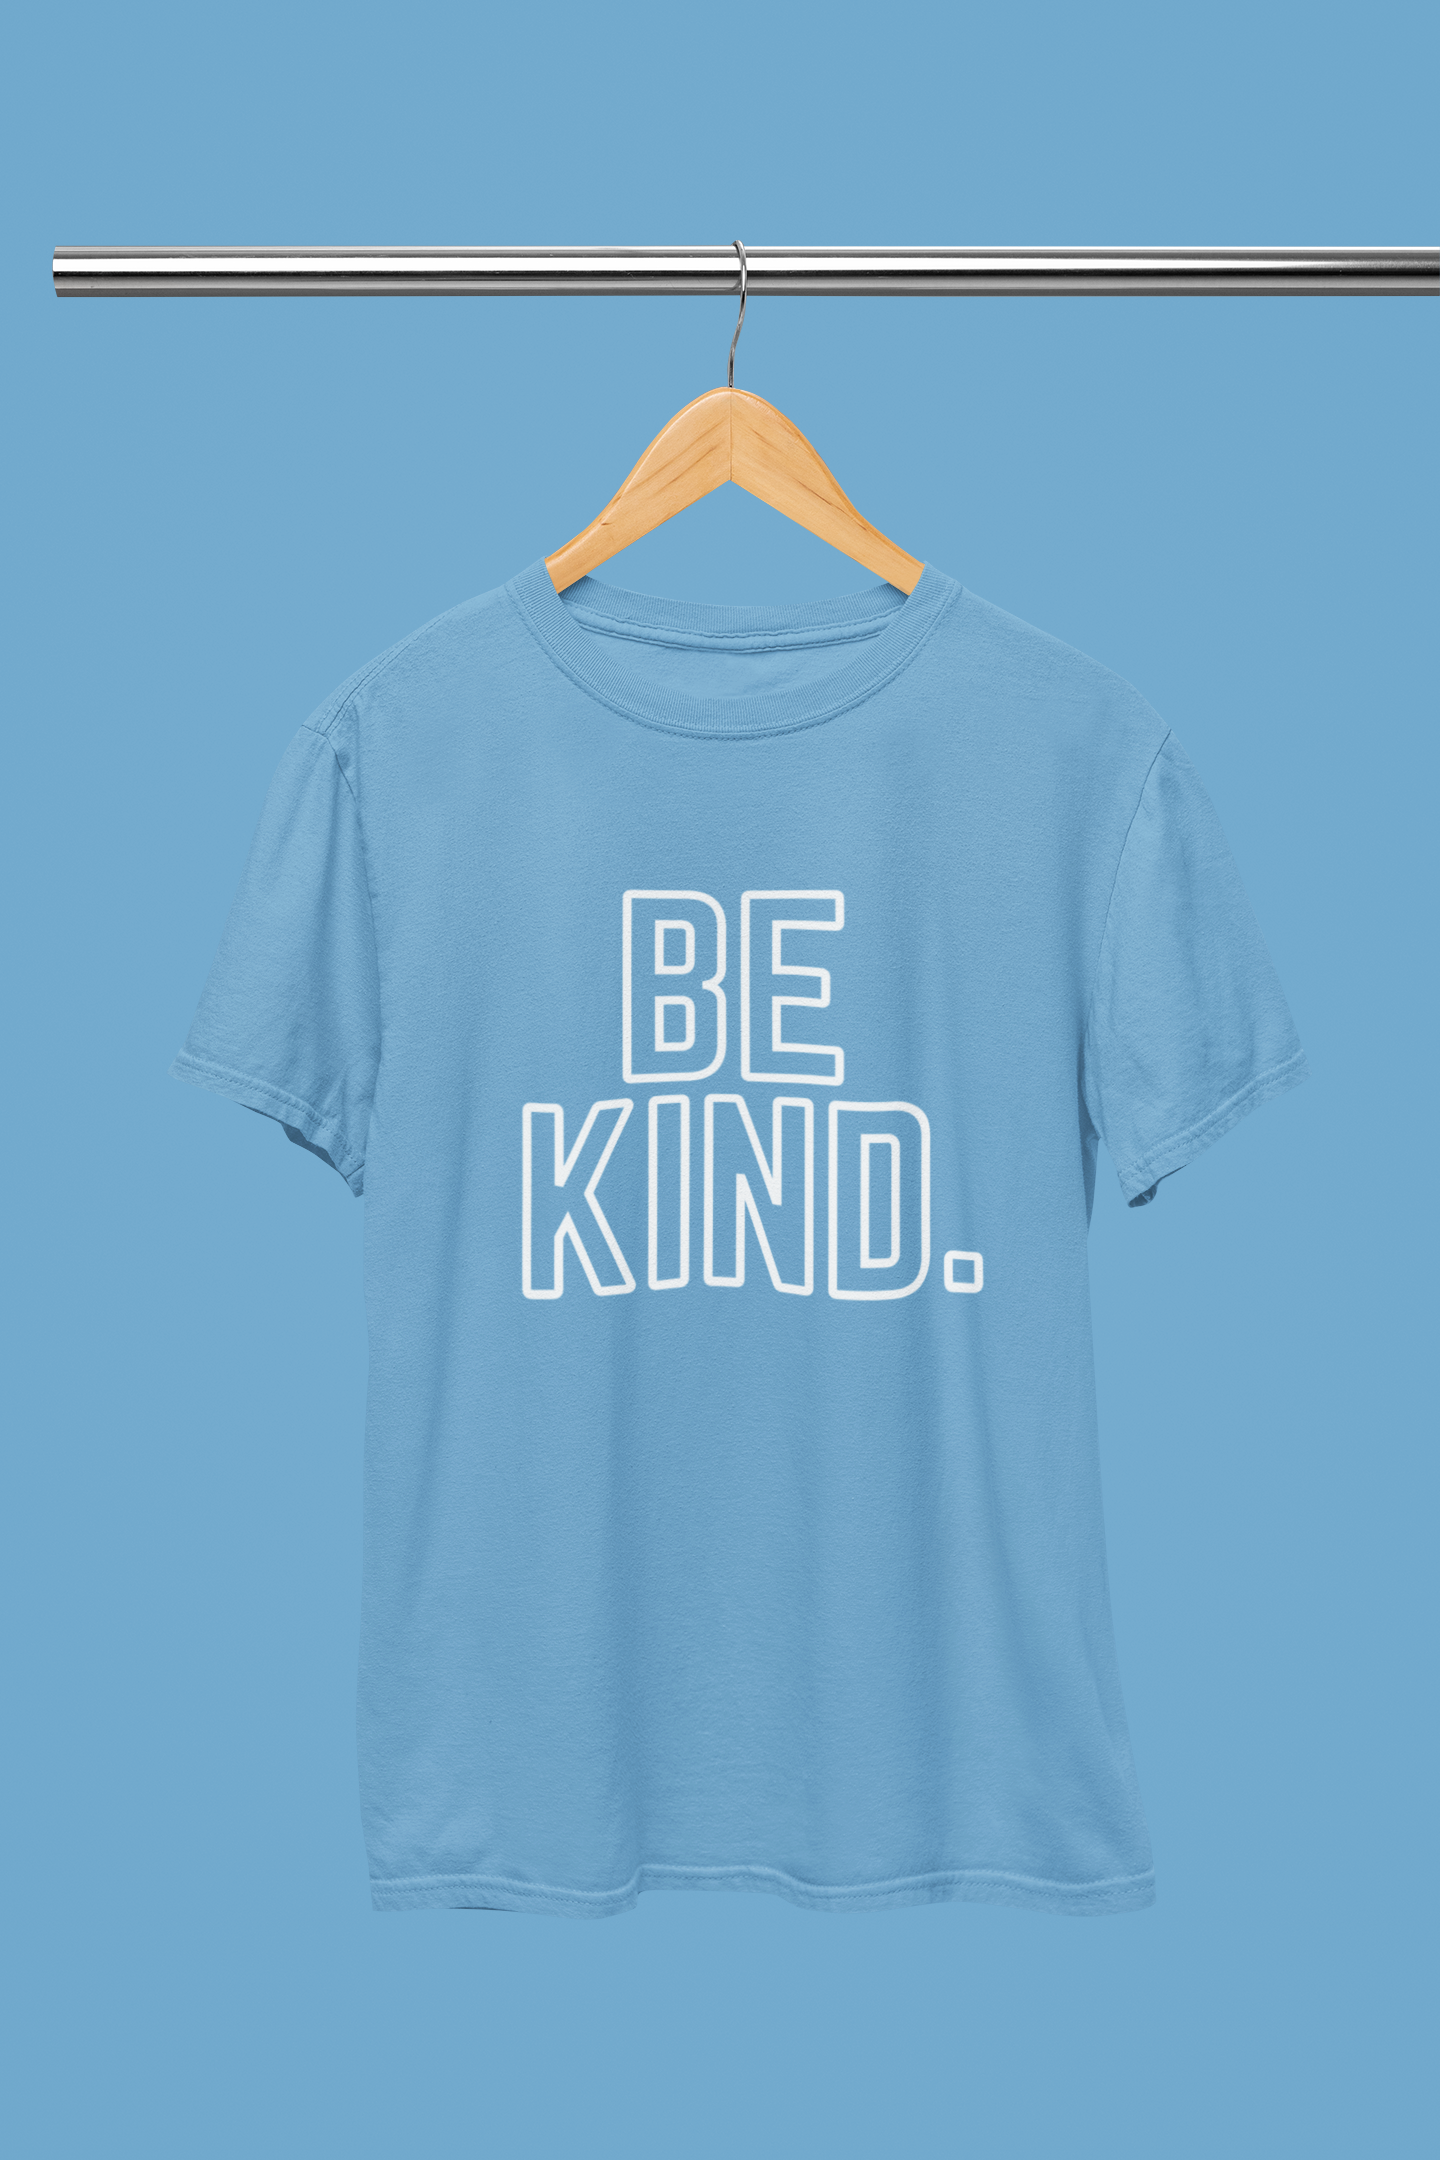 Be Kind Straw Topper – Jayden Collections